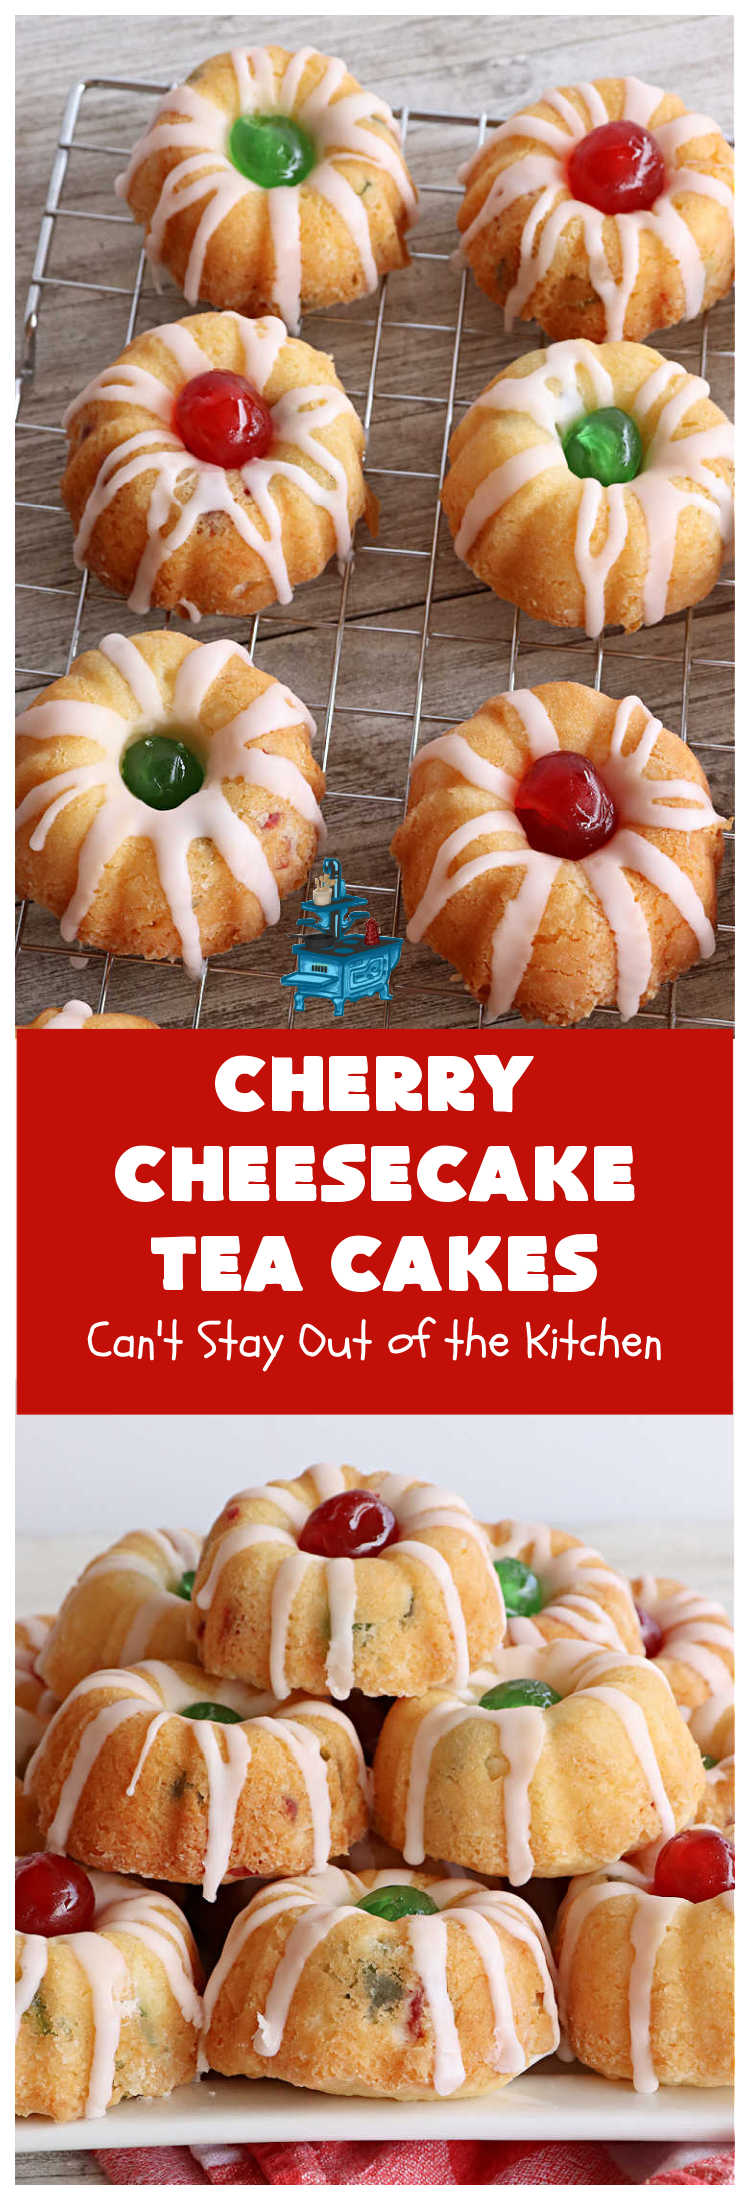 Cherry Cheesecake Tea Cakes | Can't Stay Out of the Kitchen | These miniature #Bundt #cakes will knock your socks off! They're filled with red & green #cherries & flavored with #almond extract, #CreamCheese & #Cheesecake #PuddingMix. Great #holiday or #Christmas #dessert. #CherryDessert #HolidayDessert #TeaCakes #CherryCheesecakeTeaCakes